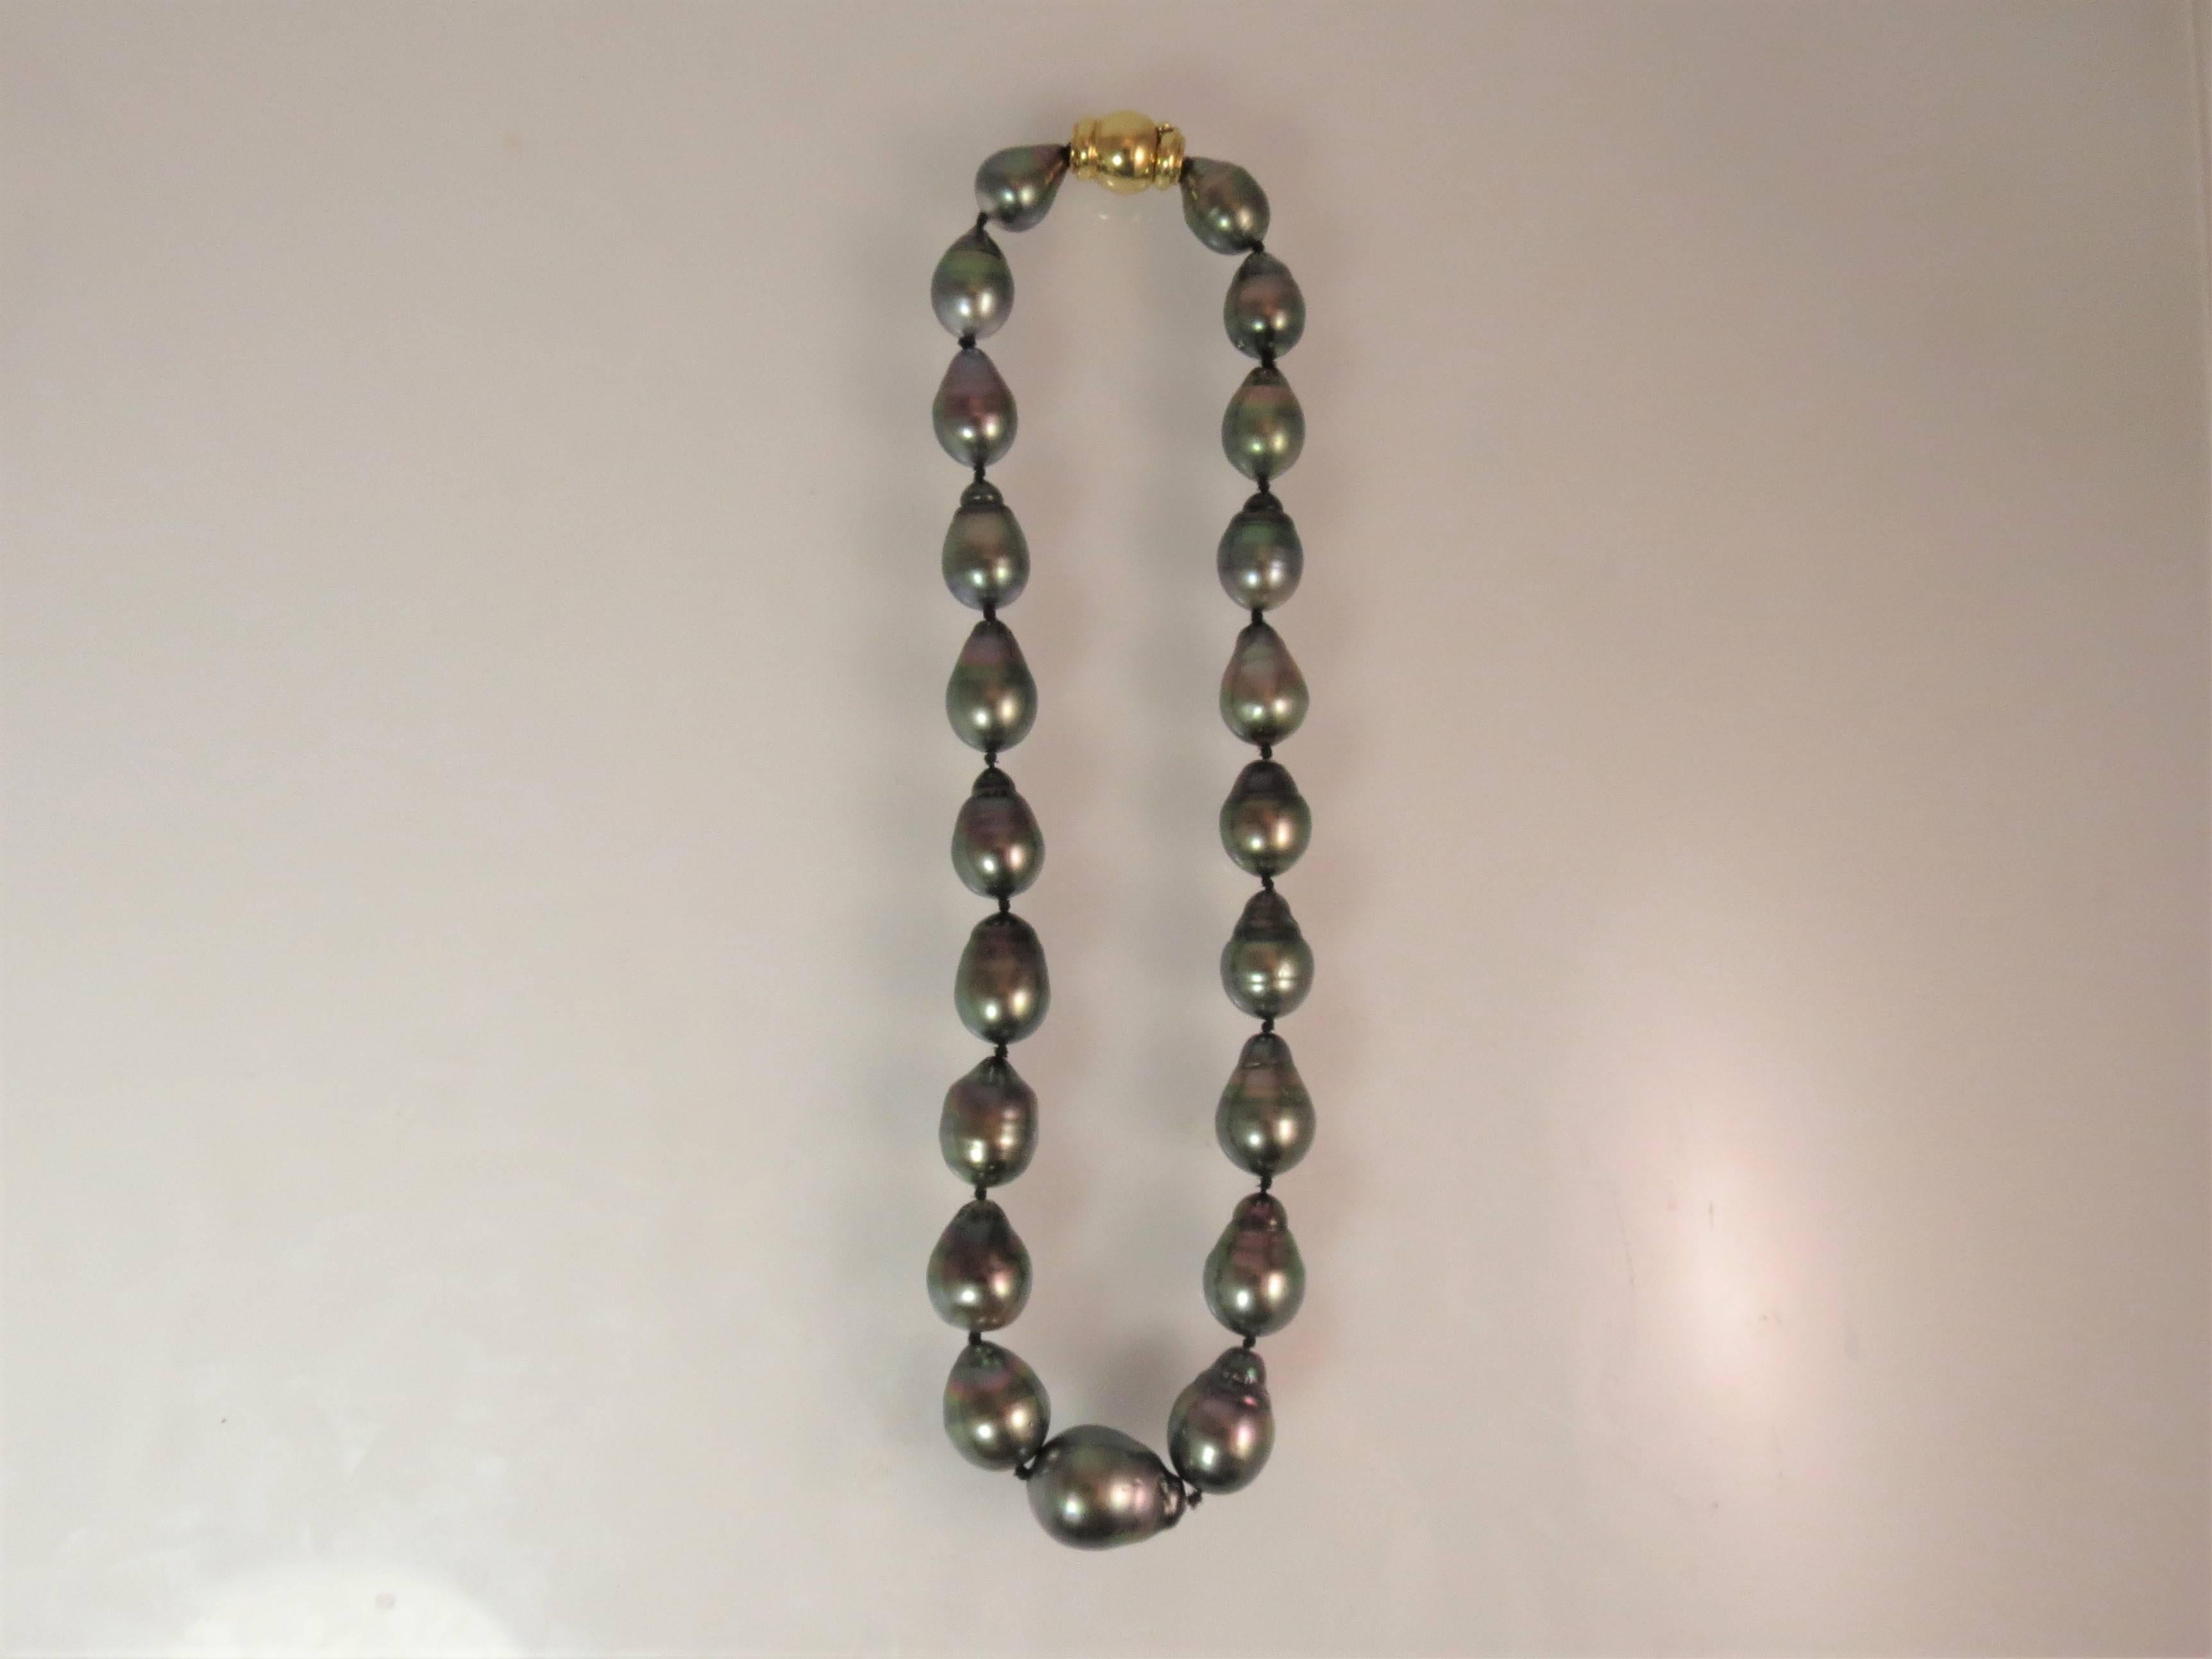 Baroque Tahitian pearl necklace with 18K yellow gold clasp, 21 pearls, measuring 15.95 x 11.50mm, 15 inches long, with 18K yellow gold clasp